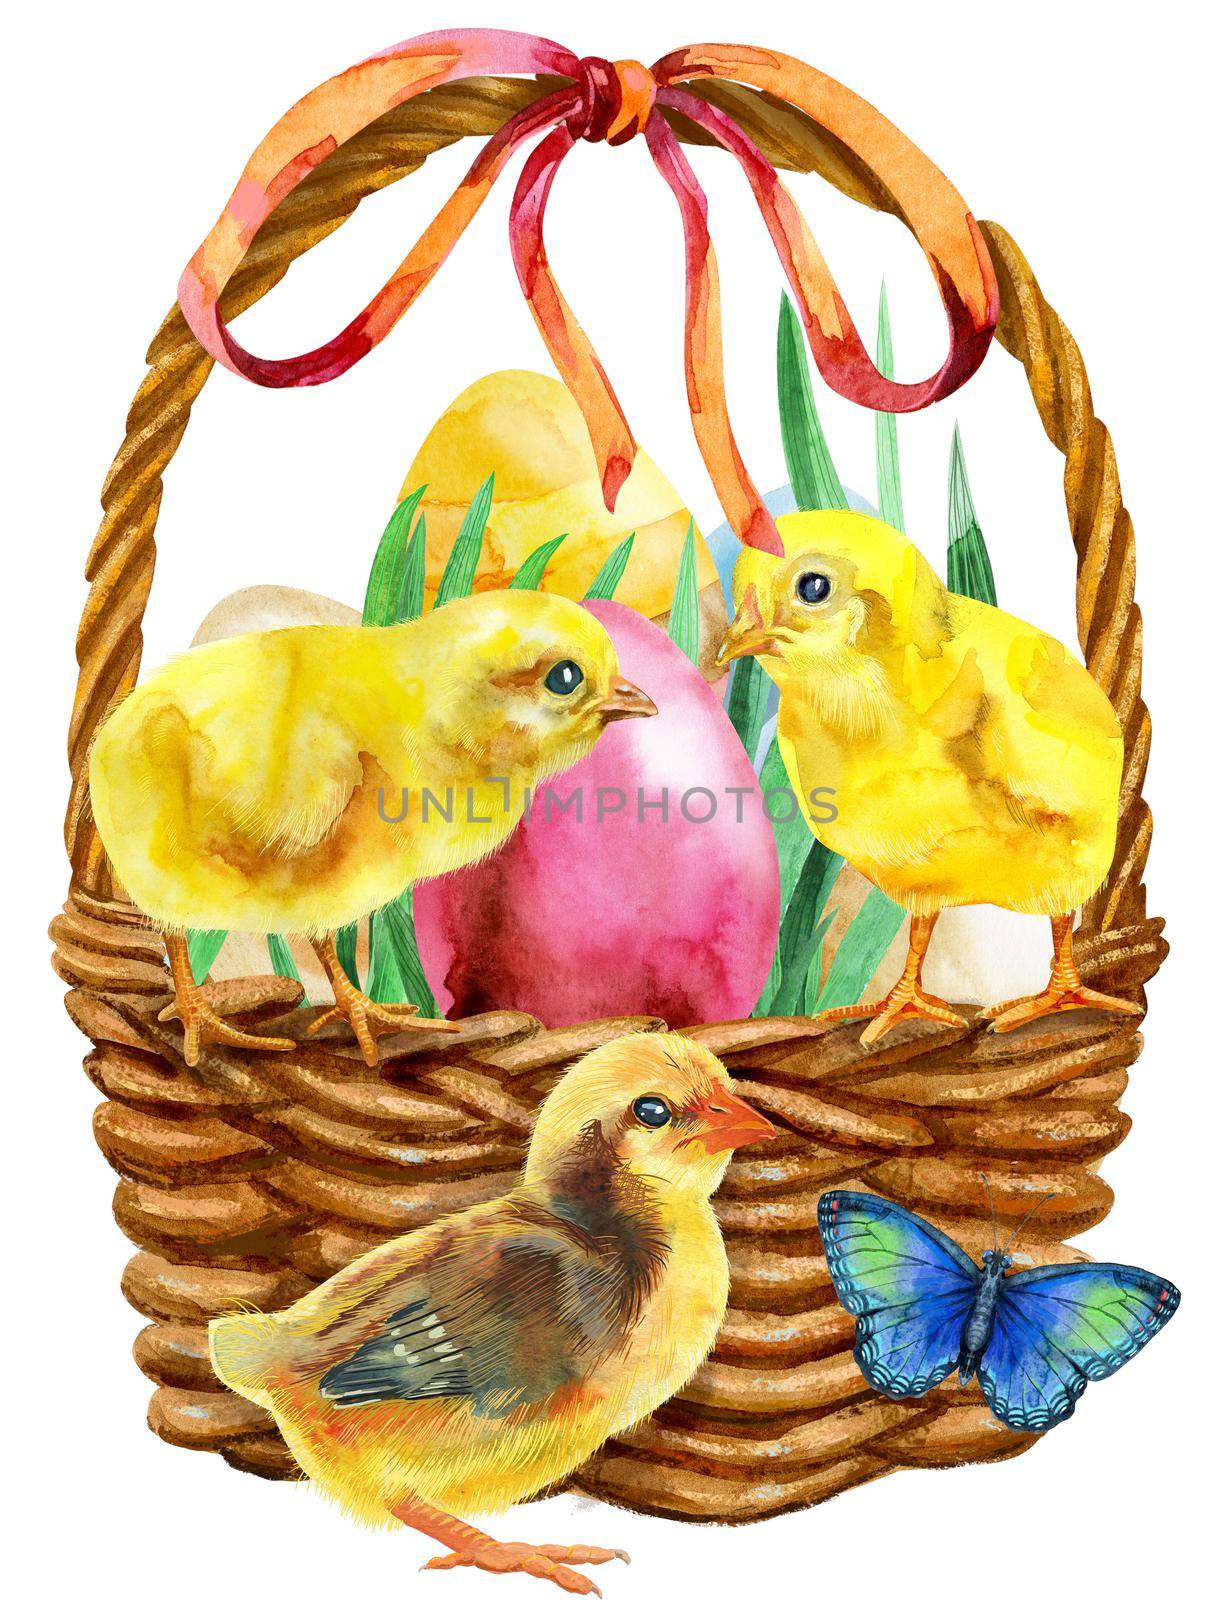 Waterciolor illustration of an Easter basket filled with eggs and yellow chickens